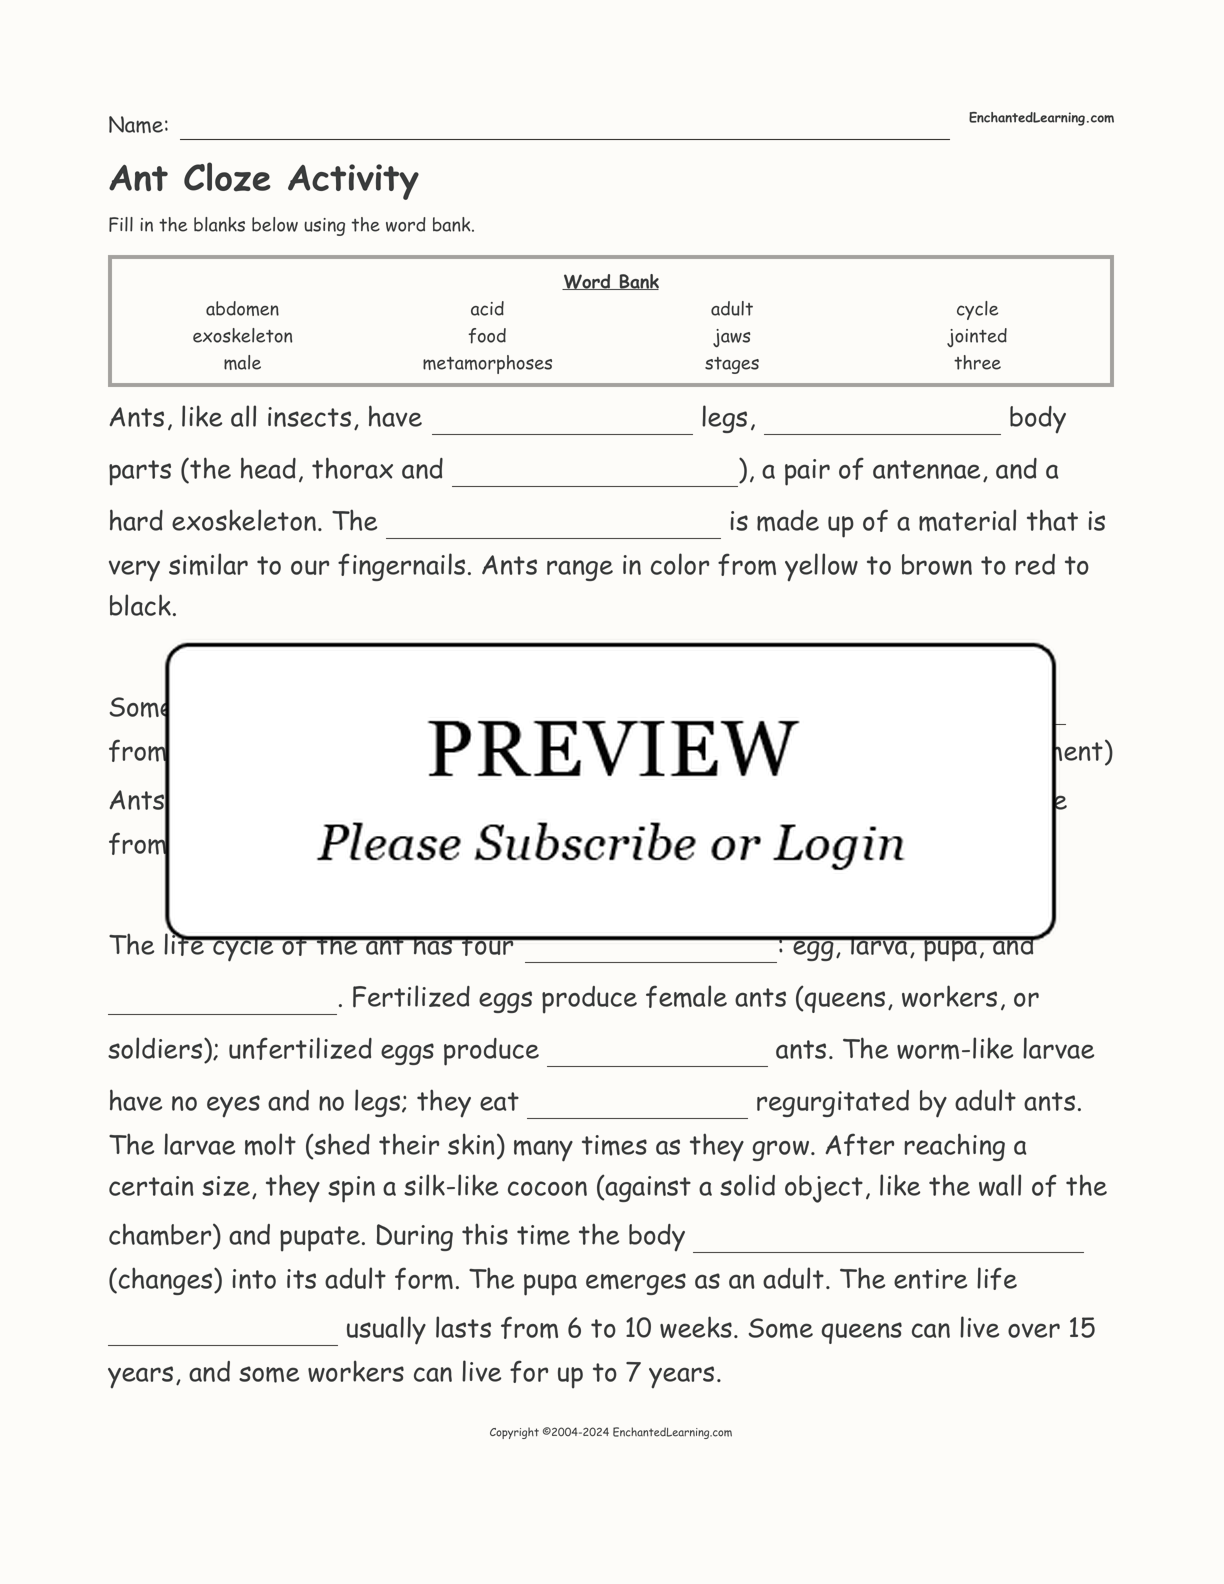 Ant Cloze Activity interactive worksheet page 1